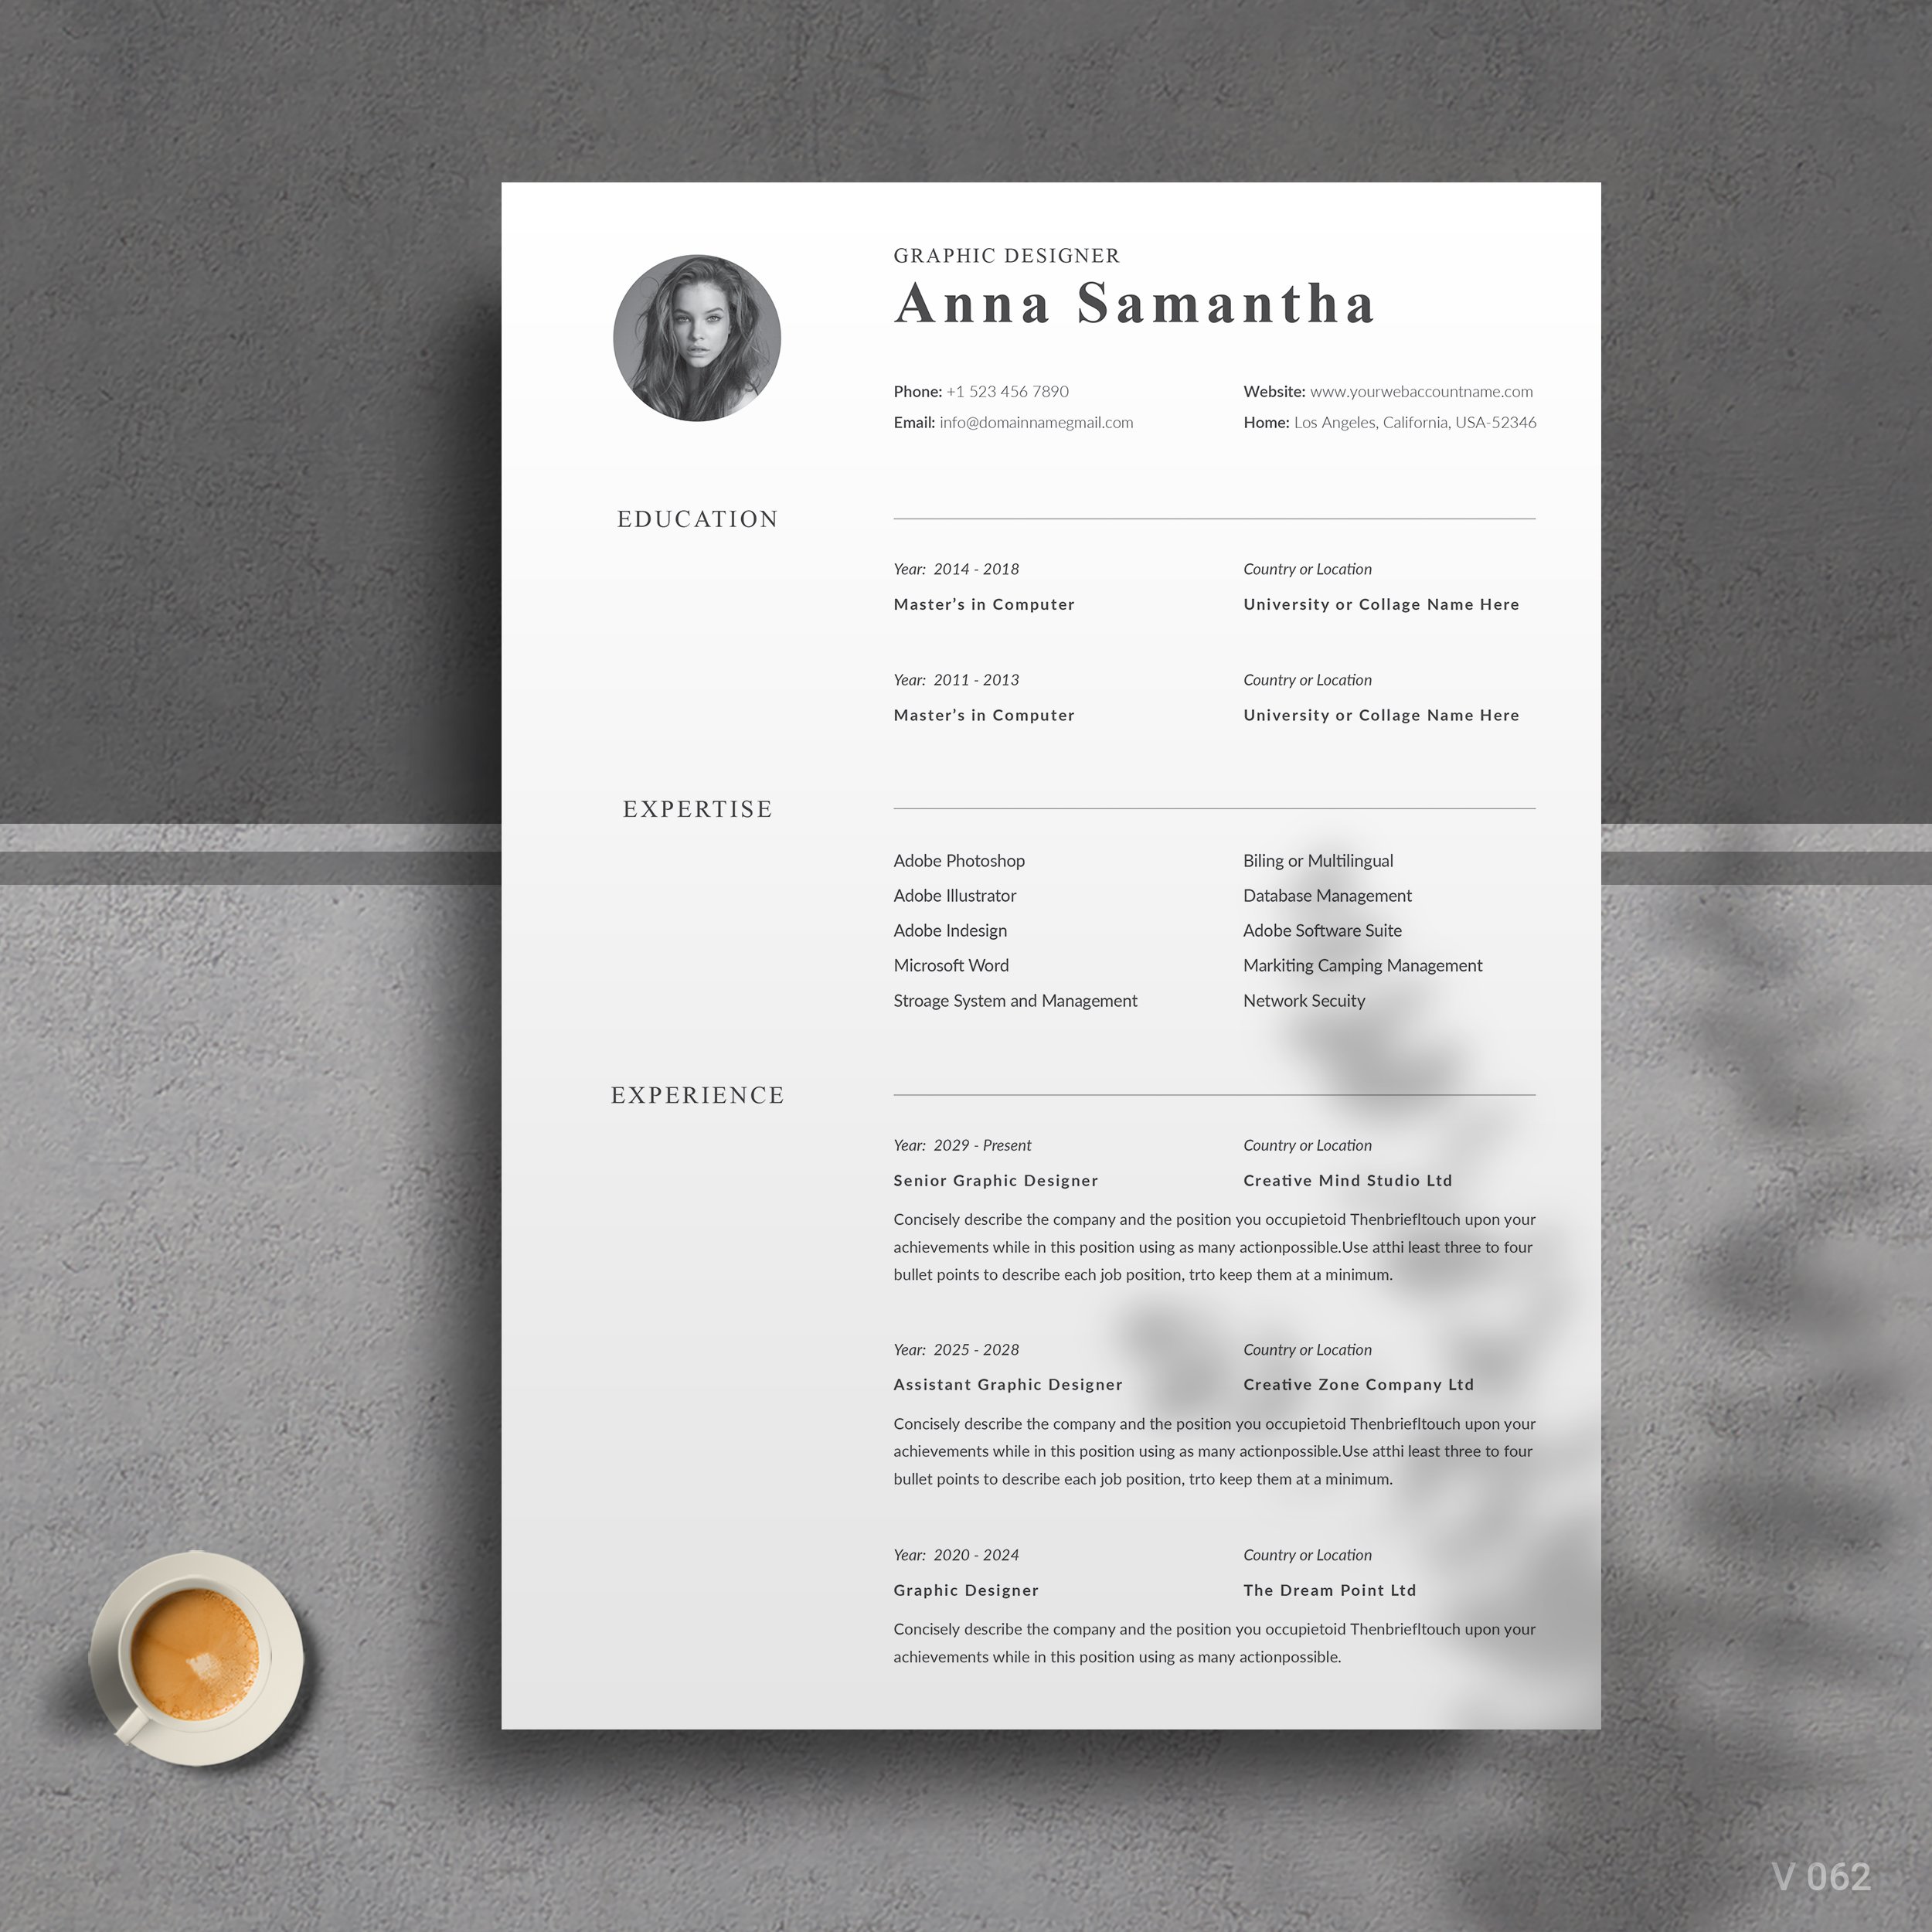 Resume/CV Word 3 page cover image.